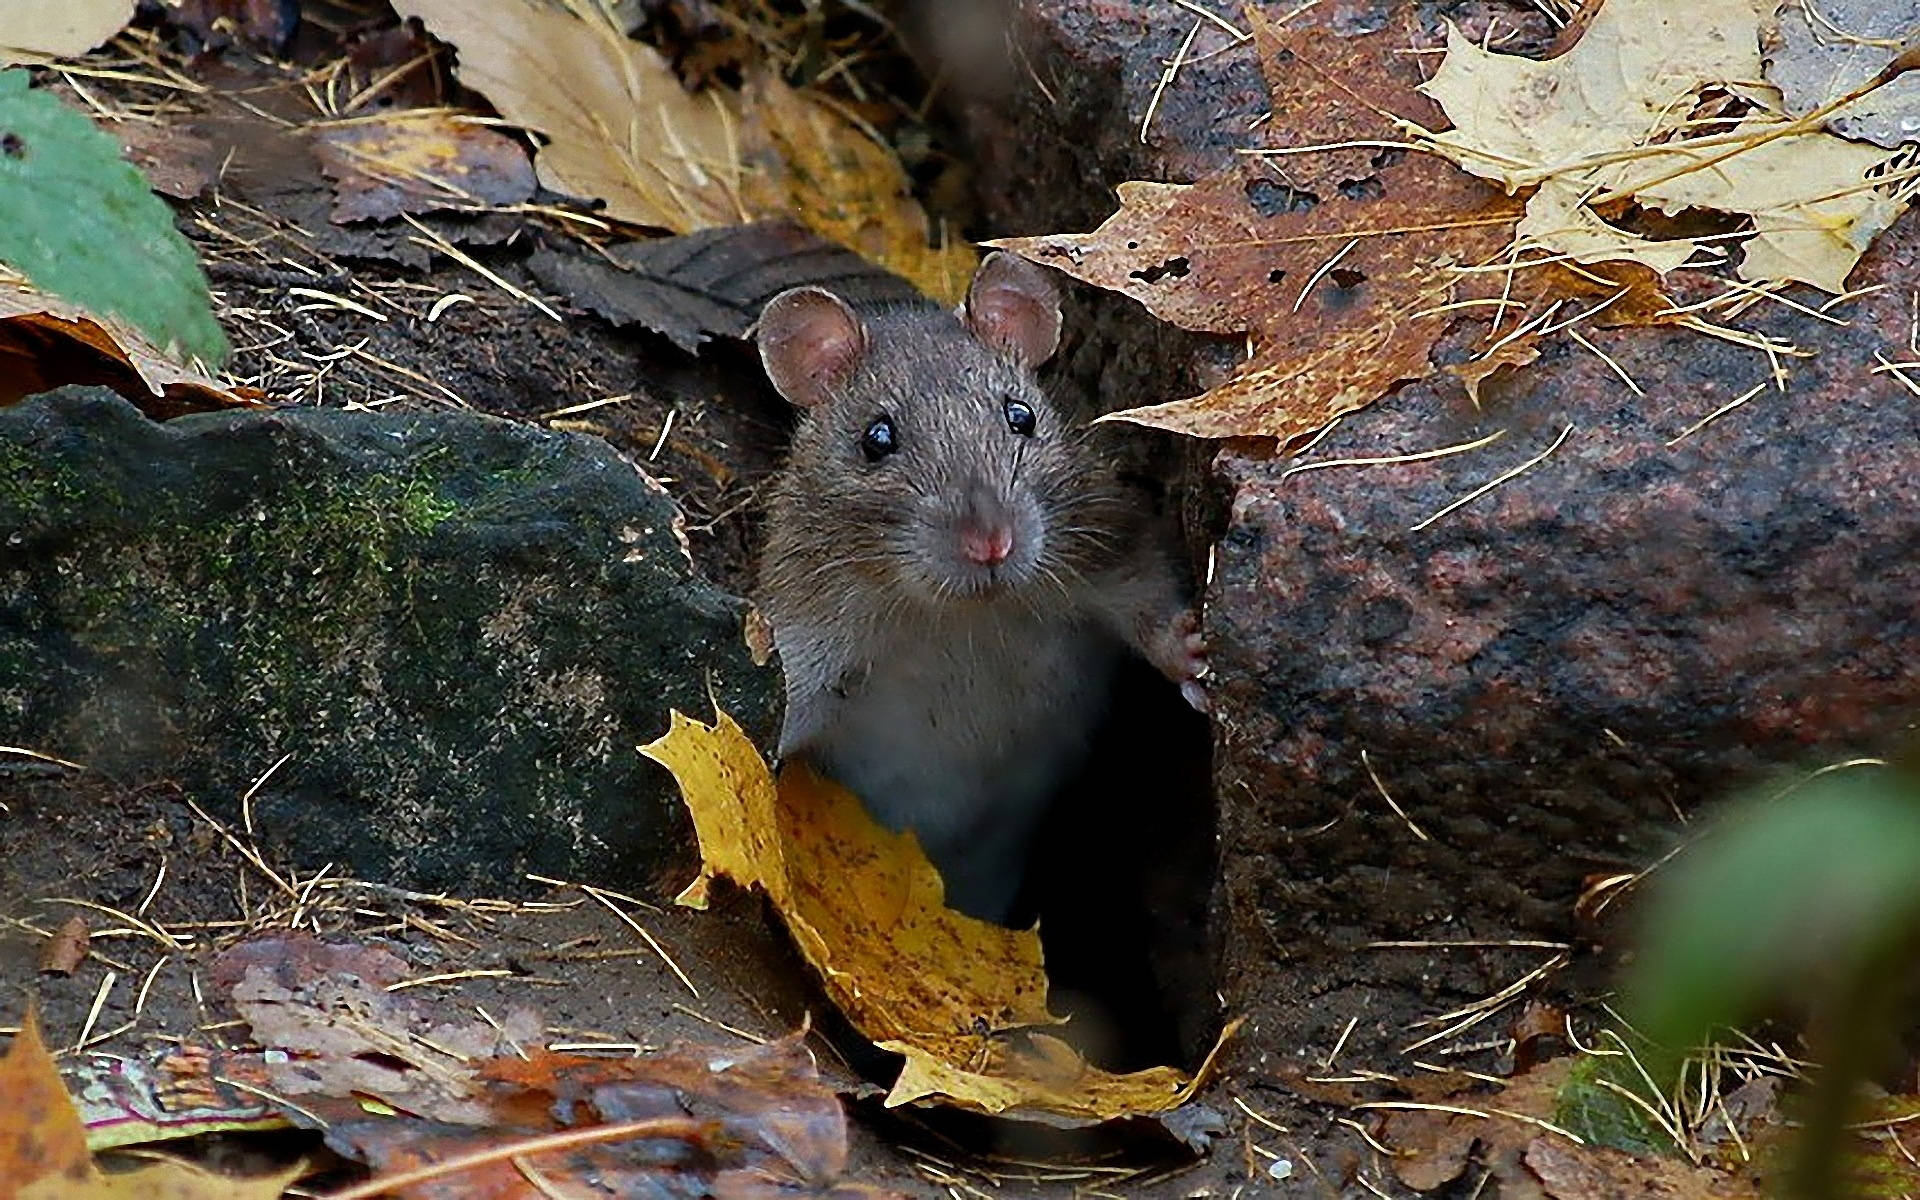 Mouse In Between Of Rocks